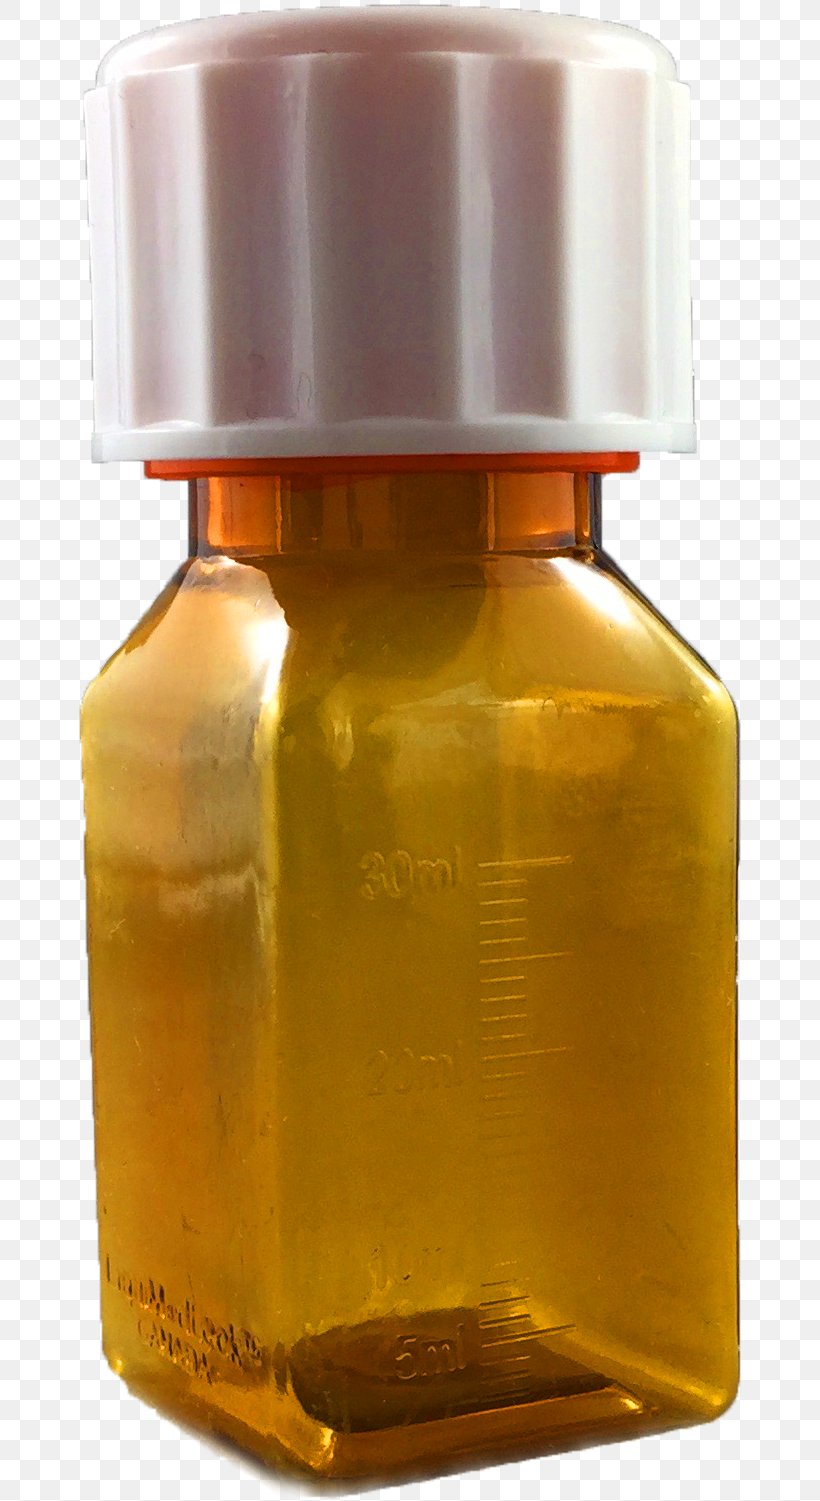 Glass Bottle PET Bottle Recycling Closure Plastic Bottle, PNG, 662x1501px, Glass Bottle, Bottle, Bottle Recycling, Caramel Color, Childresistant Packaging Download Free